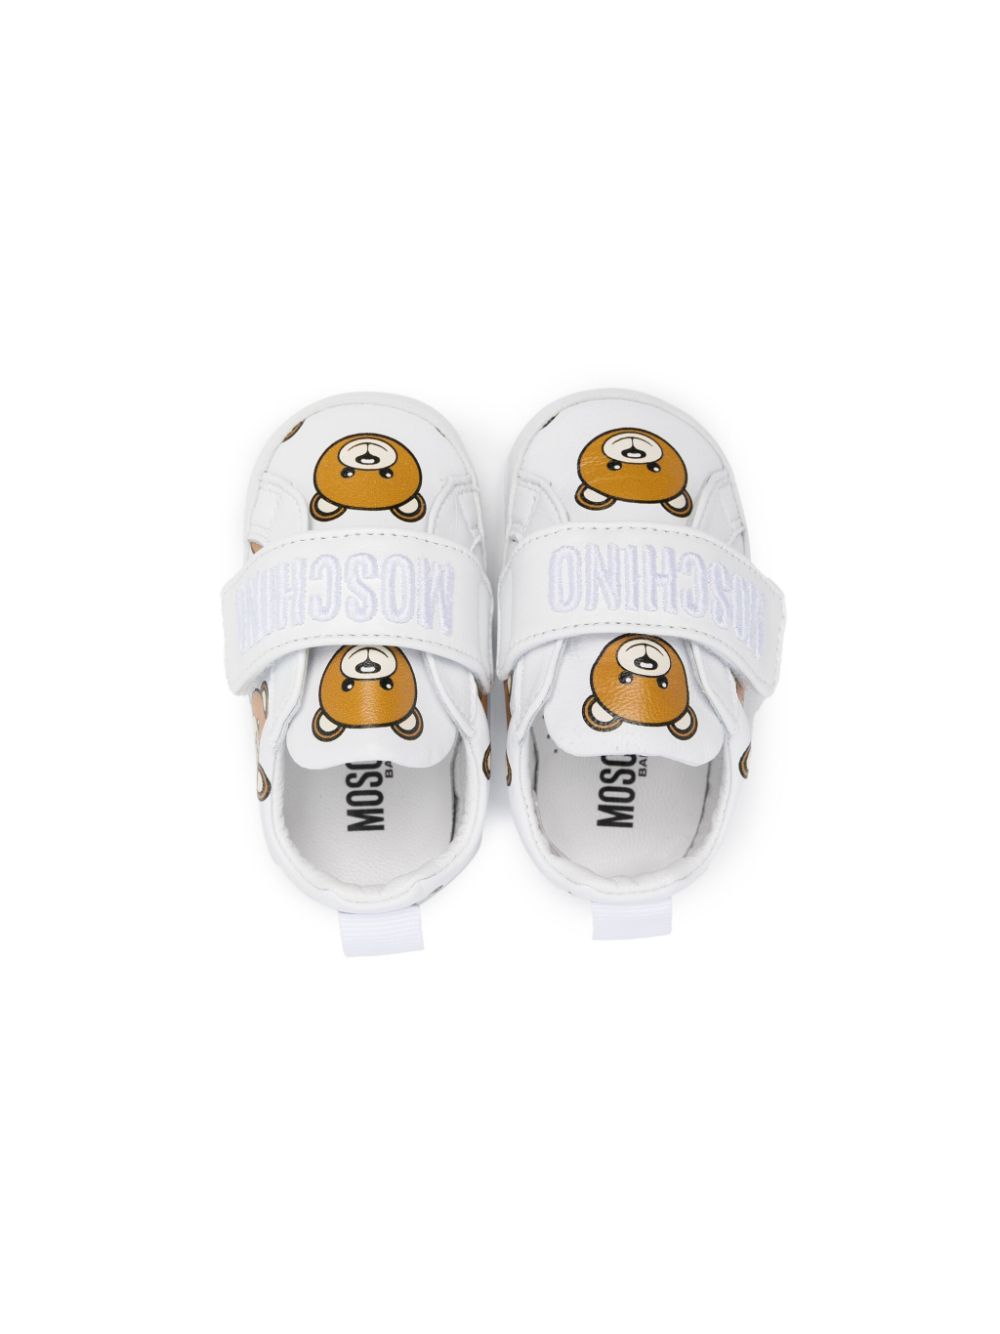 White leather baby girl sneakers